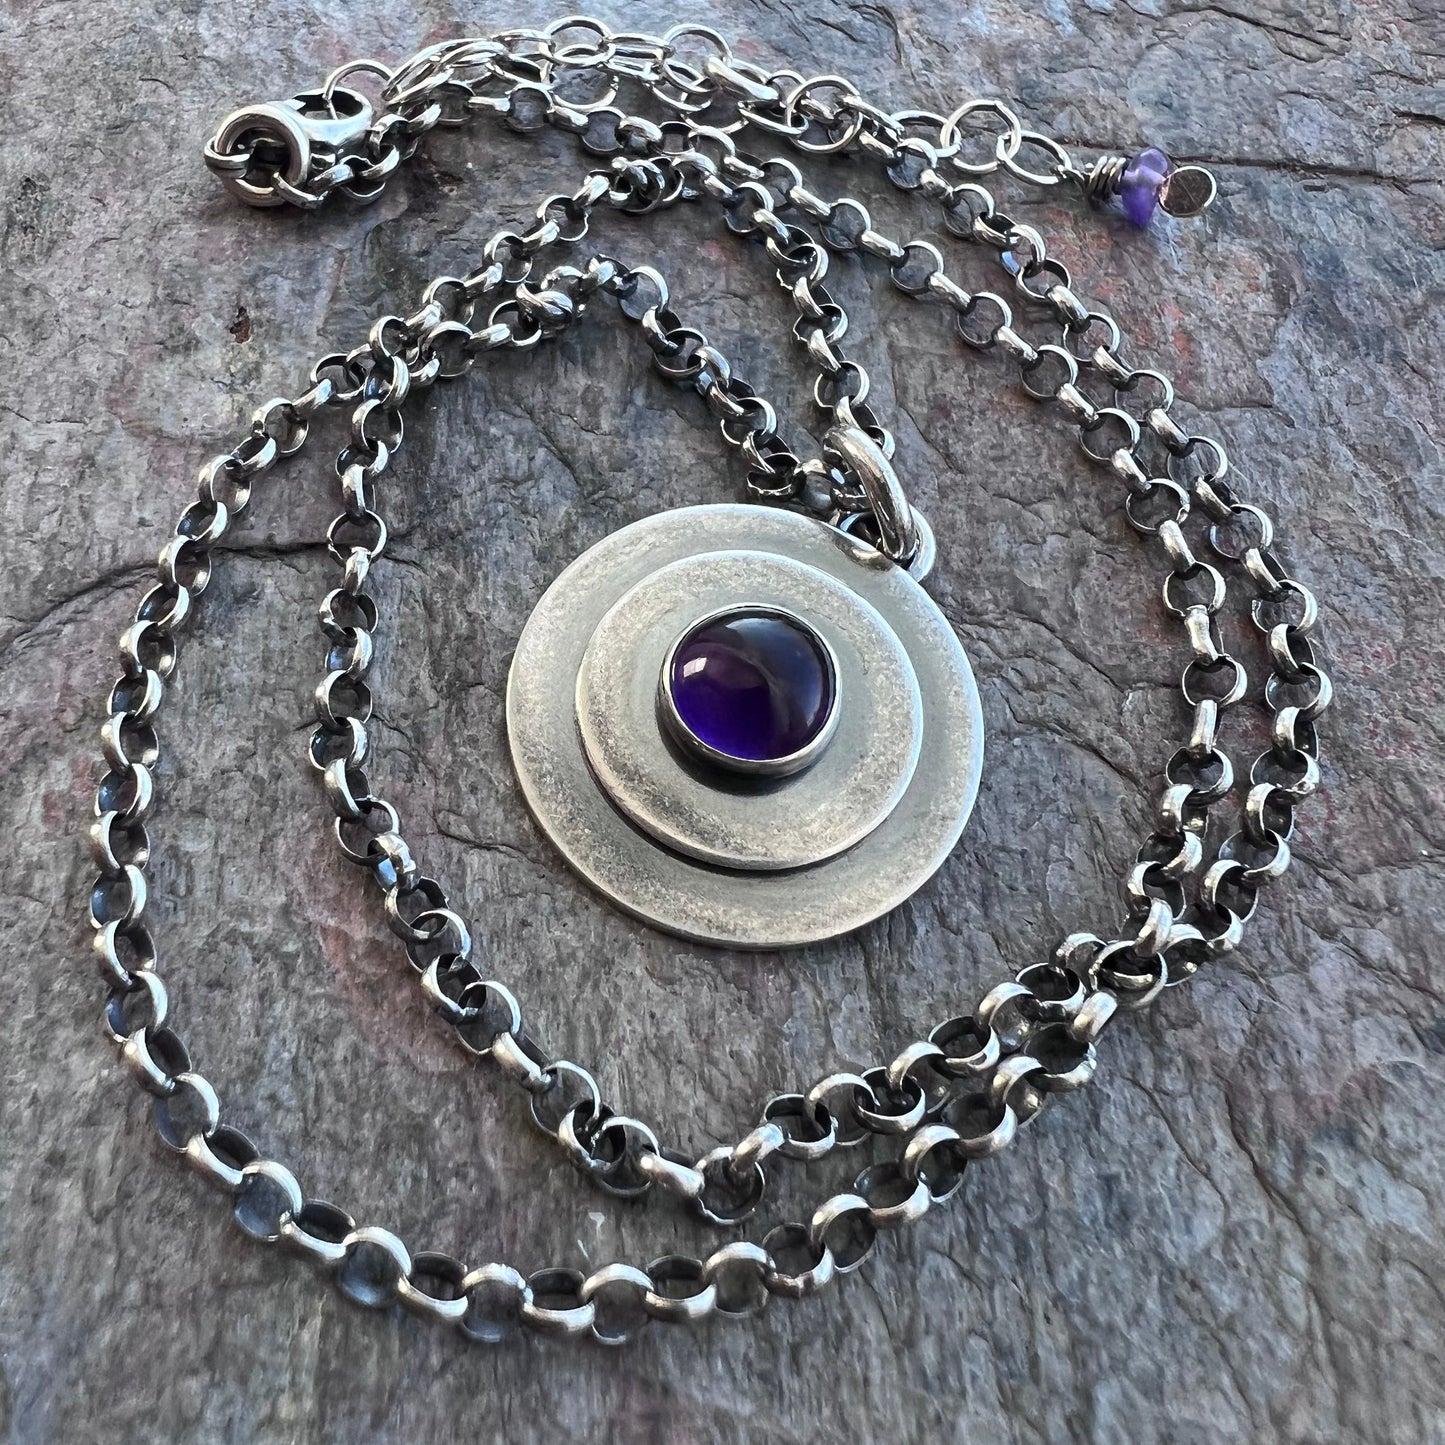 Amethyst Sterling Silver Necklace - Amethyst Cabochon Pendant on Sterling Silver Chain